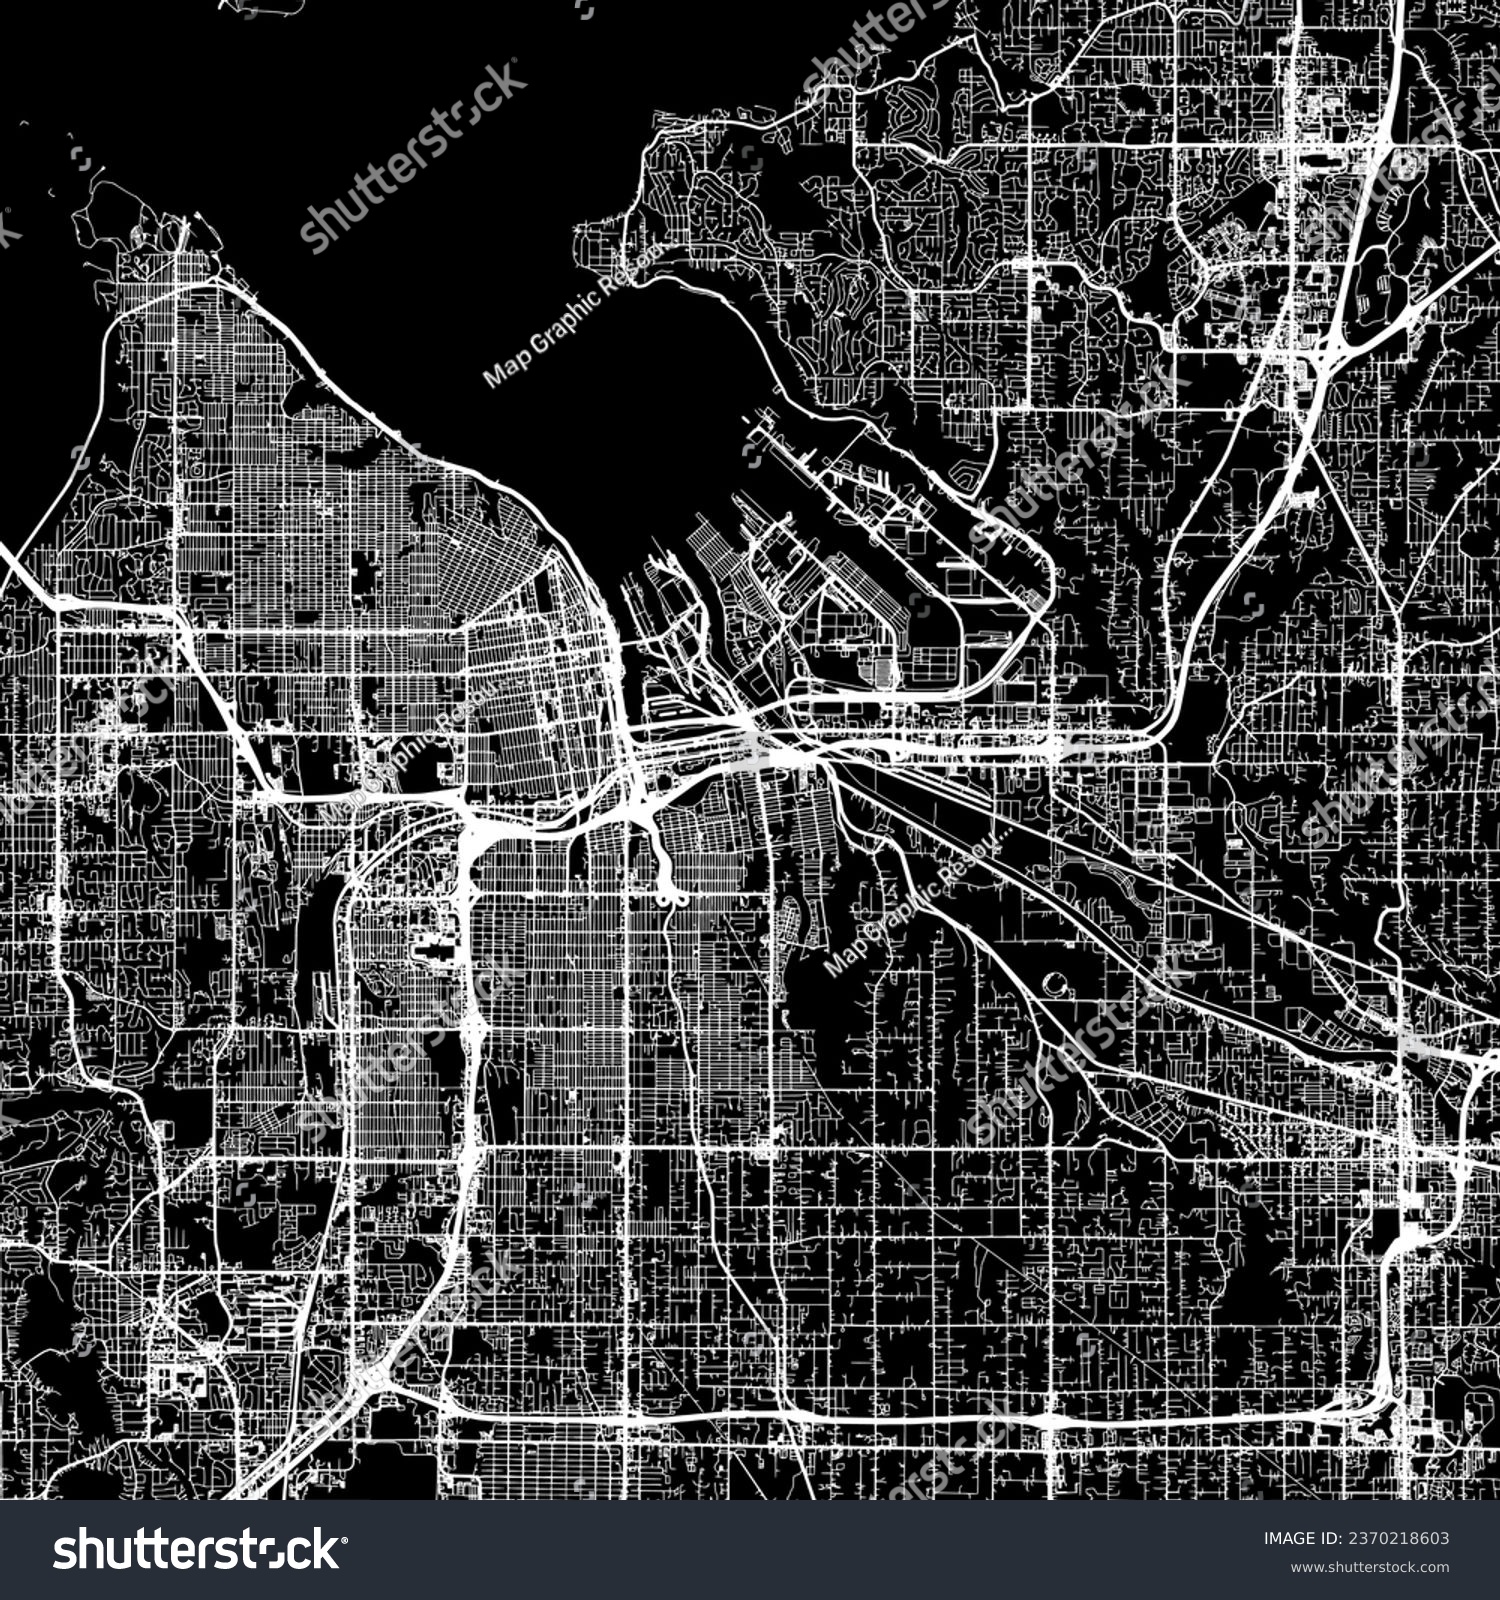 SVG of 1:1 square aspect ratio vector road map of the city of Tacoma Washington in the United States of America with white roads on a black background. svg